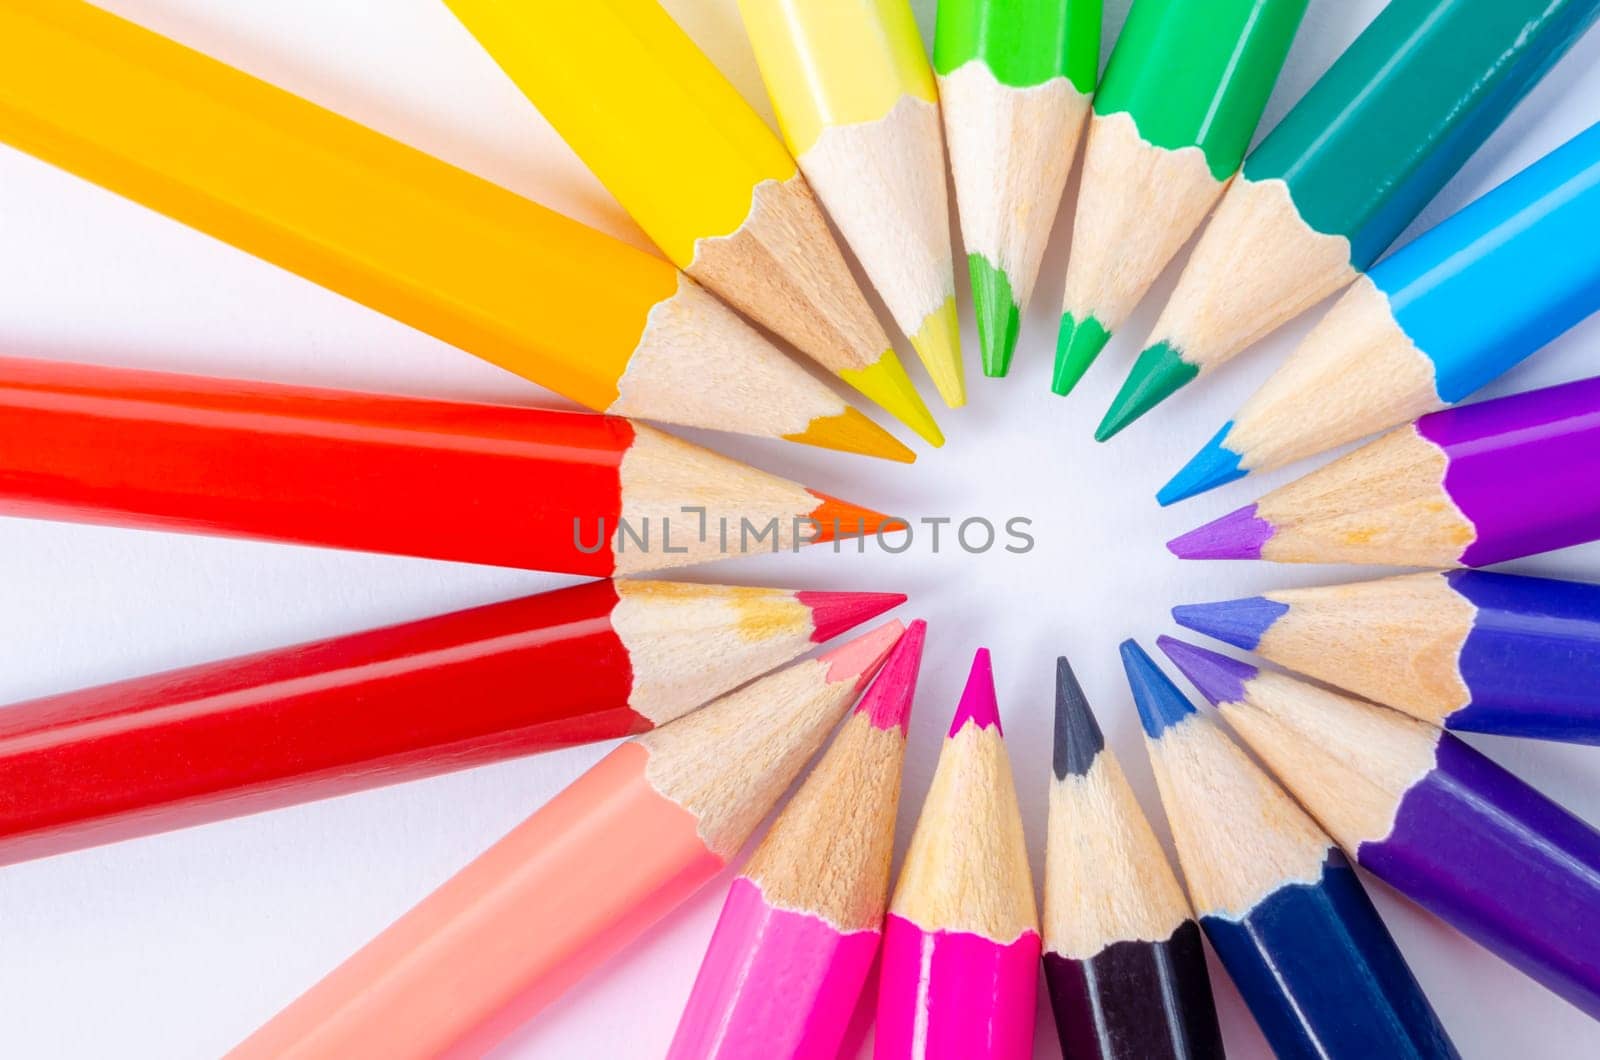 The colored pencils on a white background by Gamjai